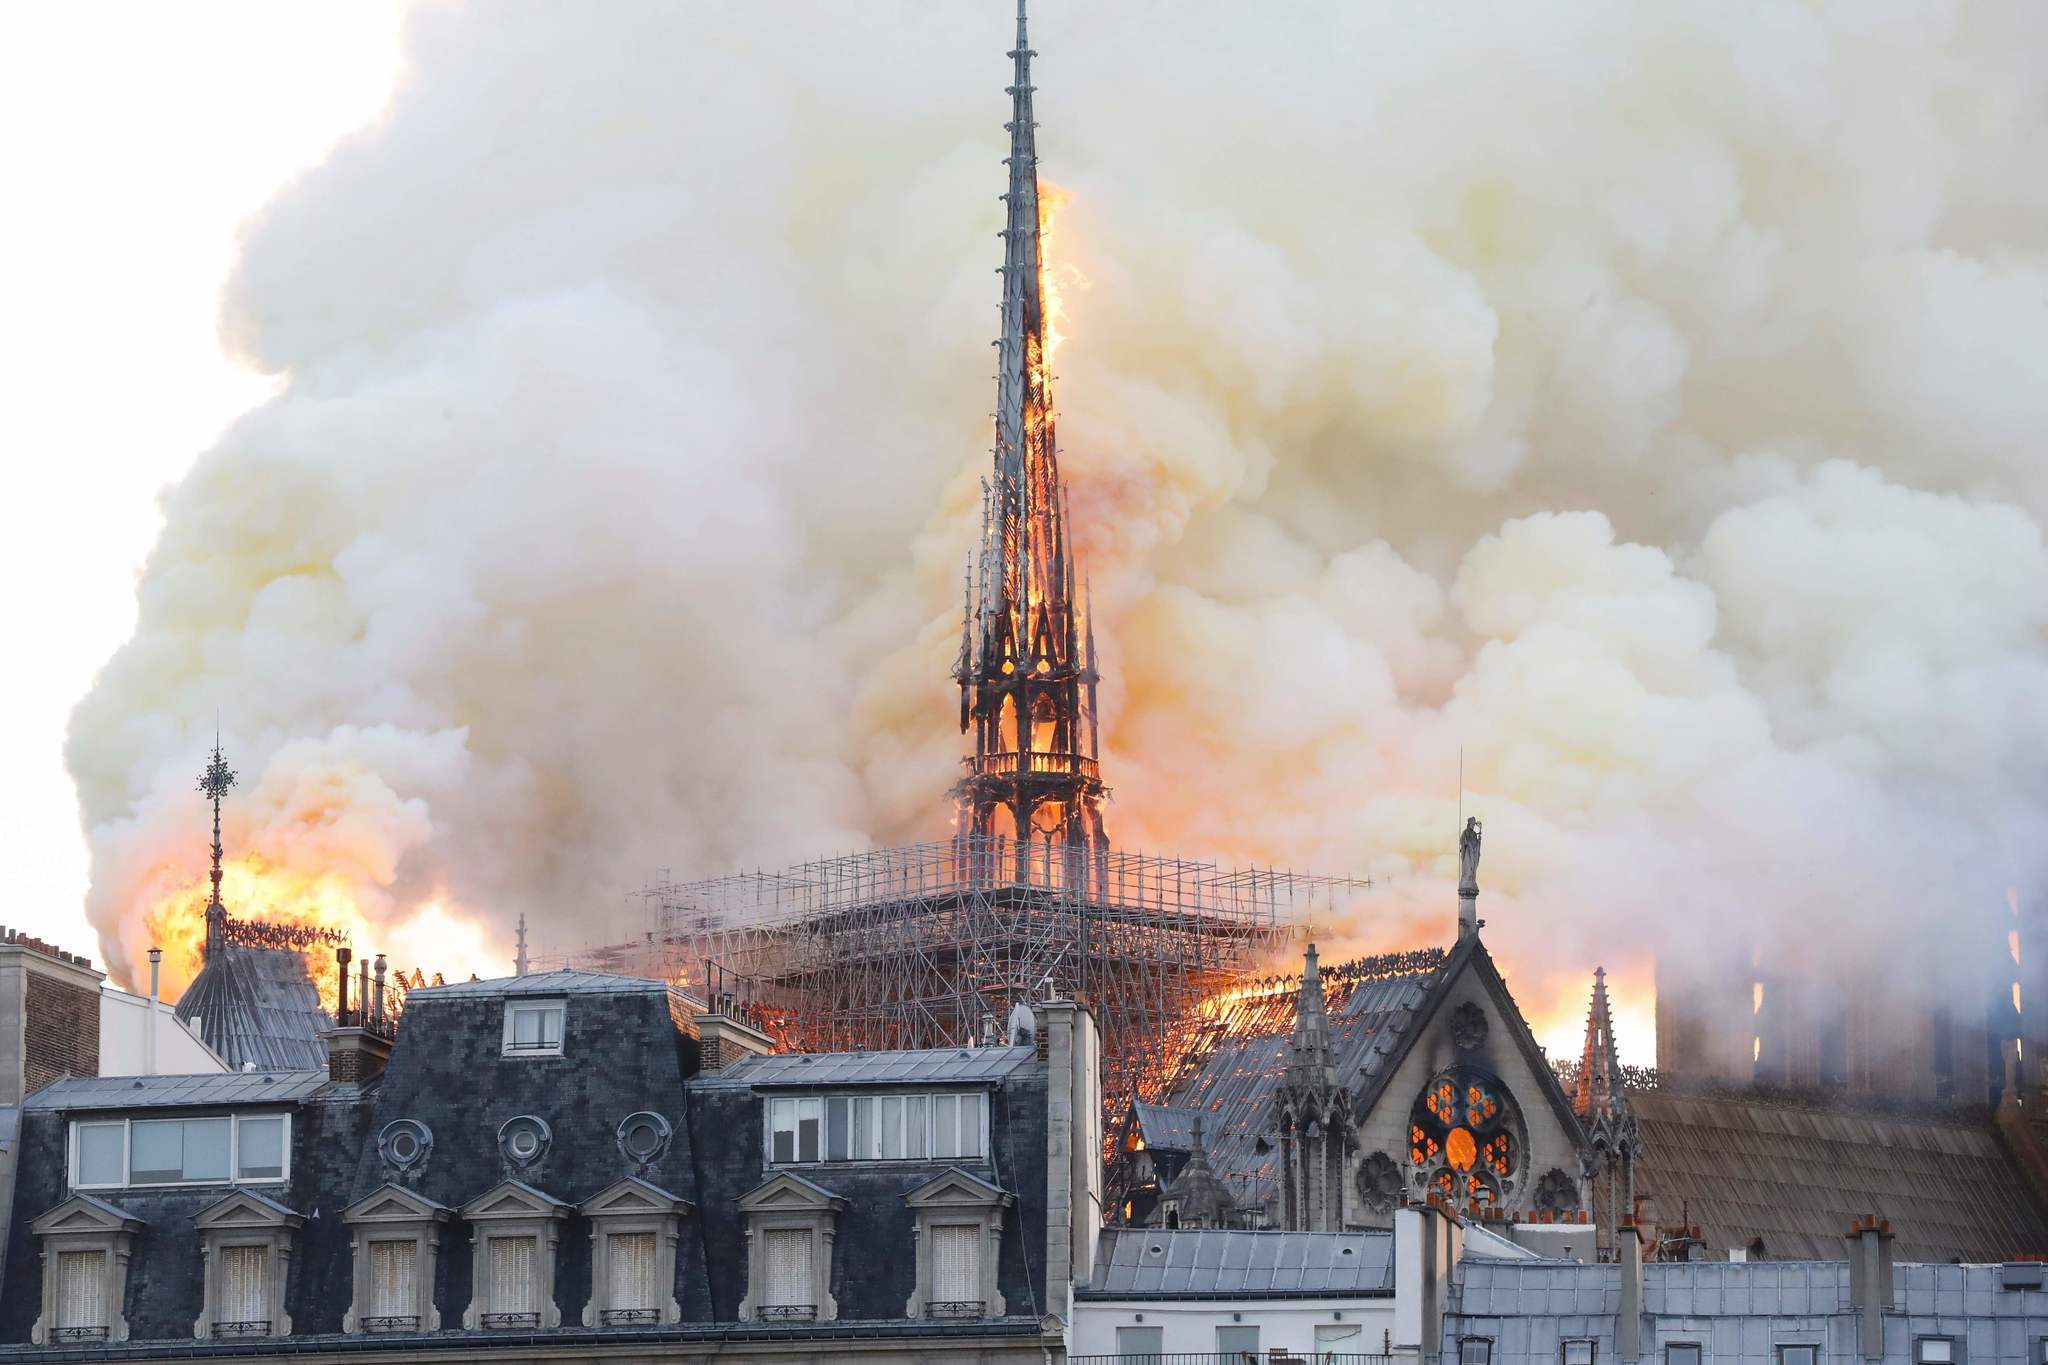 ct notre dame cathedral fire photos 20190415 009